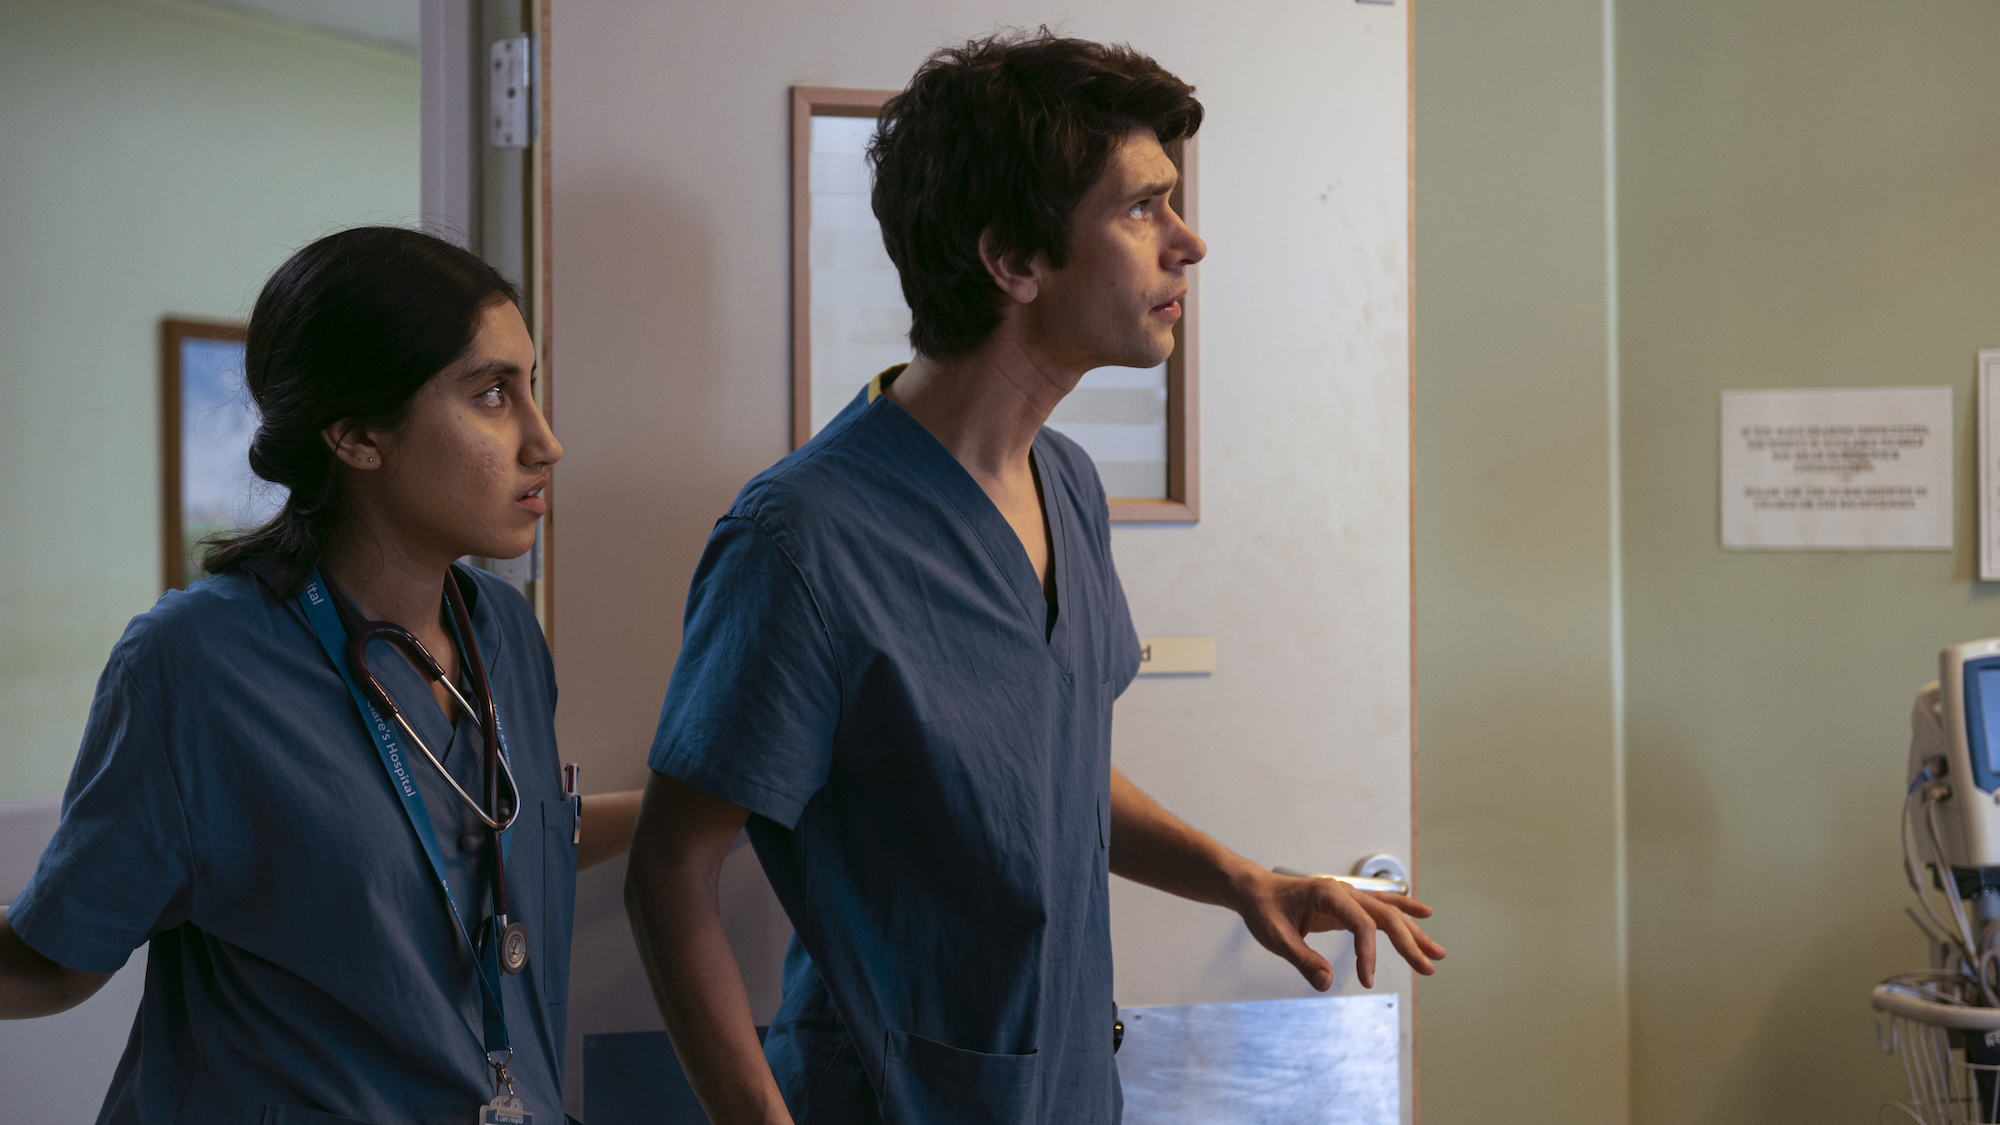 ADAM (Ben Whishaw) and SHRUTI (Ambika Mod) enter to see TRACY (Michele Austin) has pulled the emergency cord. With; TRISHNI (Anna Andreson); Richard Thomson (TRISHNI BF) - This is Going to Hurt _ Season 1, Episode 3 - Photo Credit: Anika Molnar/Sister Pictures/BBC Studios/AMC